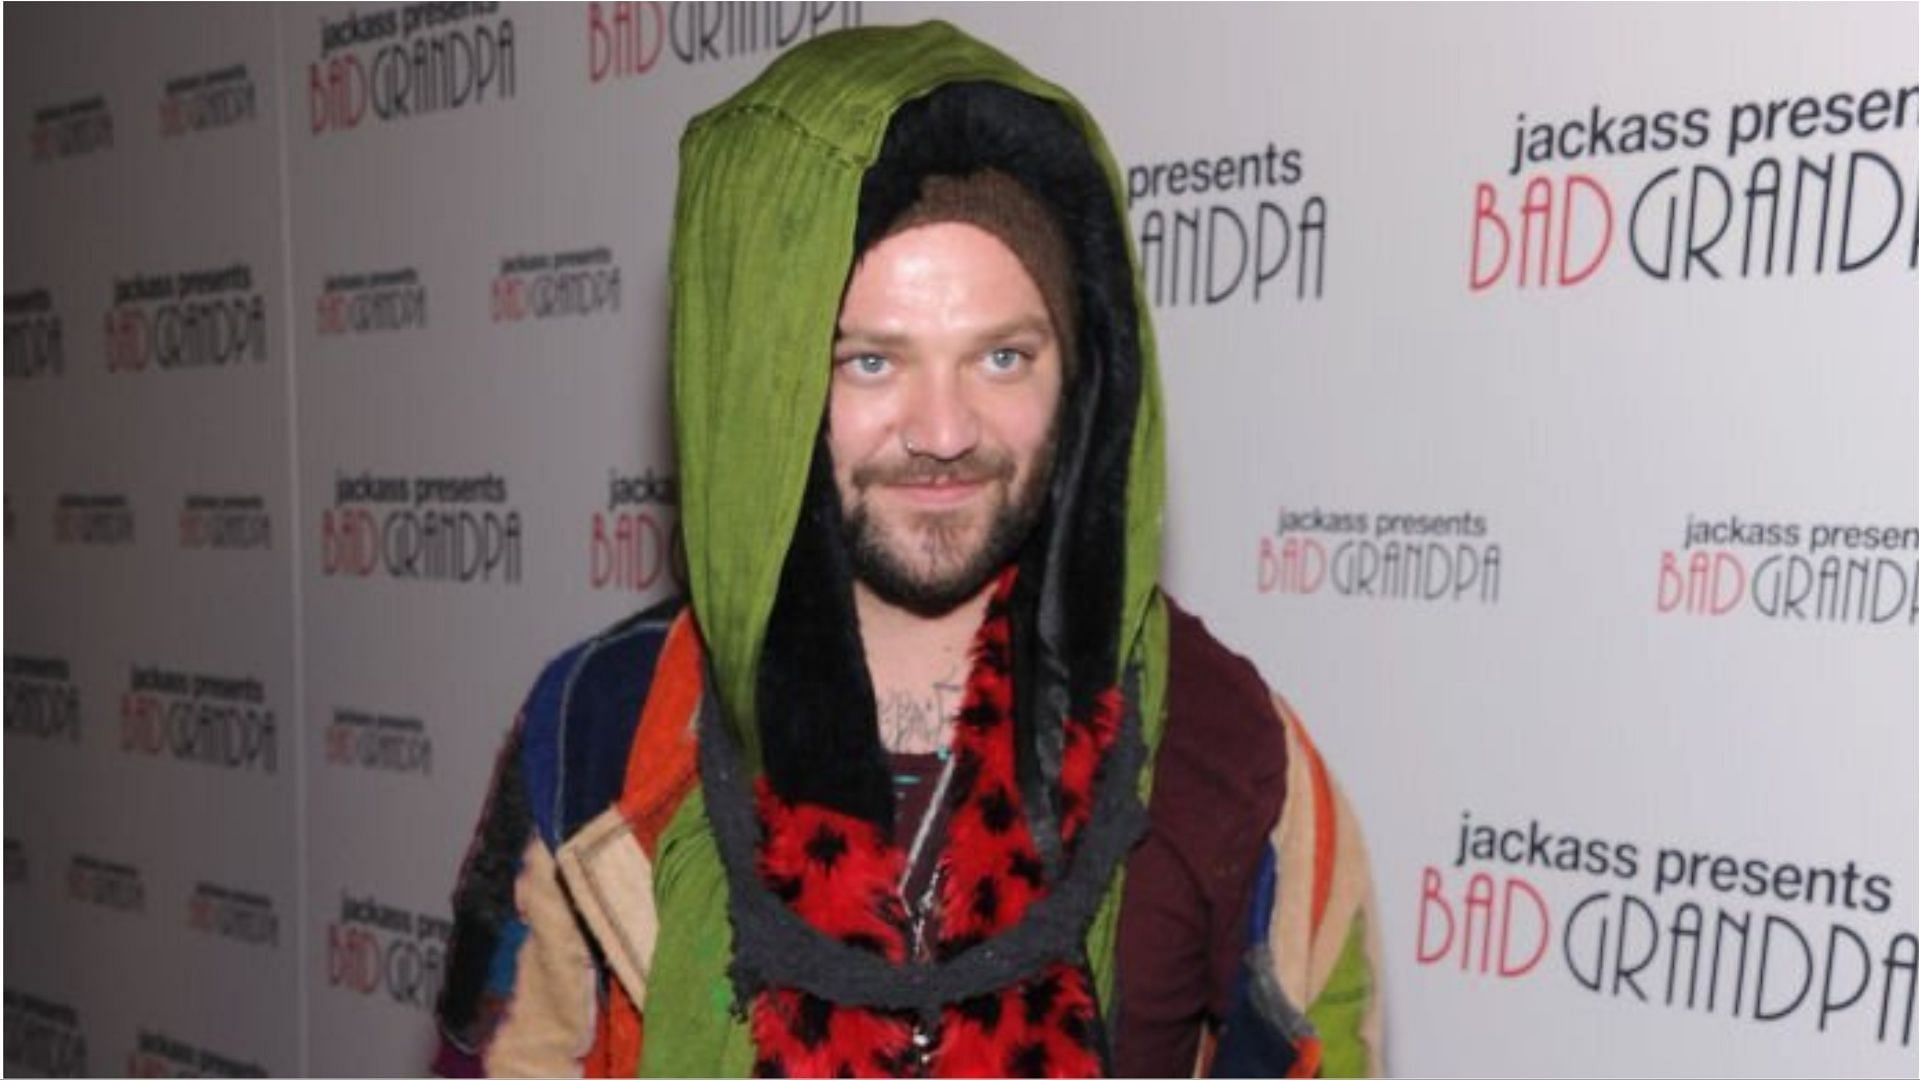 An arrest warrant has been issued against Bam Margera after he was involved in a physical altercation (Image via Dimitrios Kambouris/Getty Images)